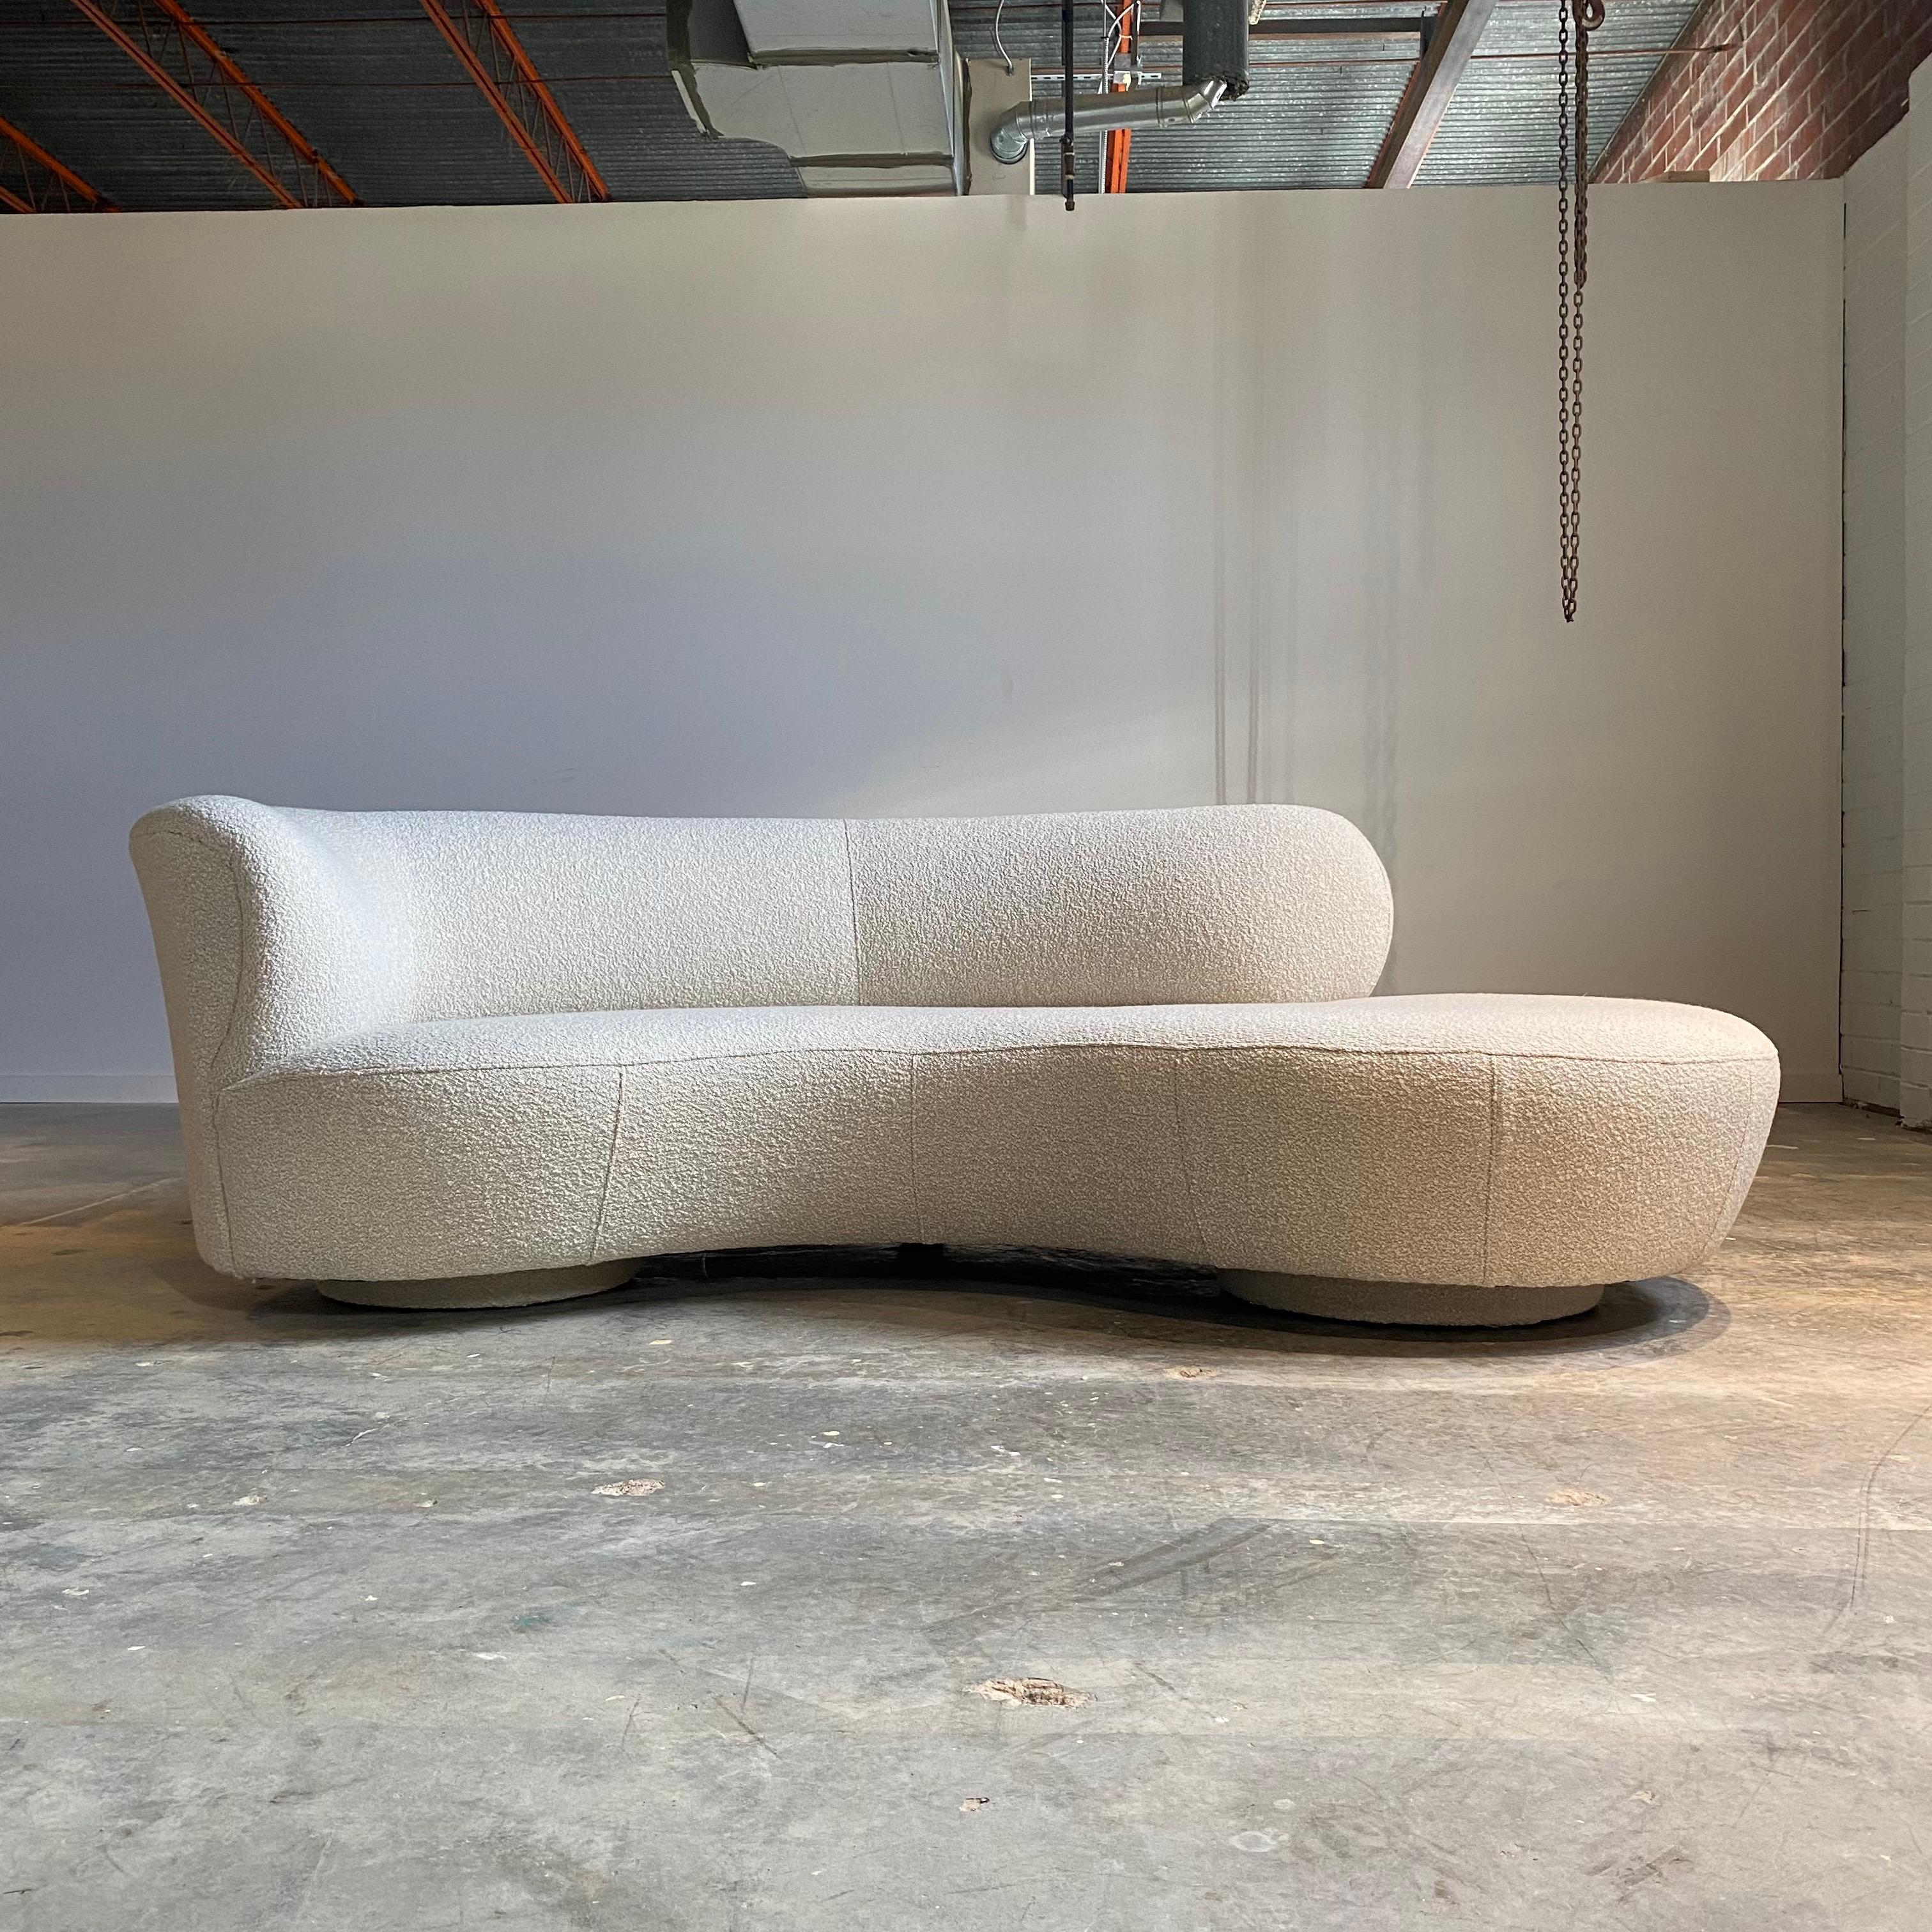 With sculptural curves and organic shape this vintage sofa looks great from all sides. Expertly recovered in an ivory boucle and ready to place. A stunning vintage design with an aesthetic sure to last.